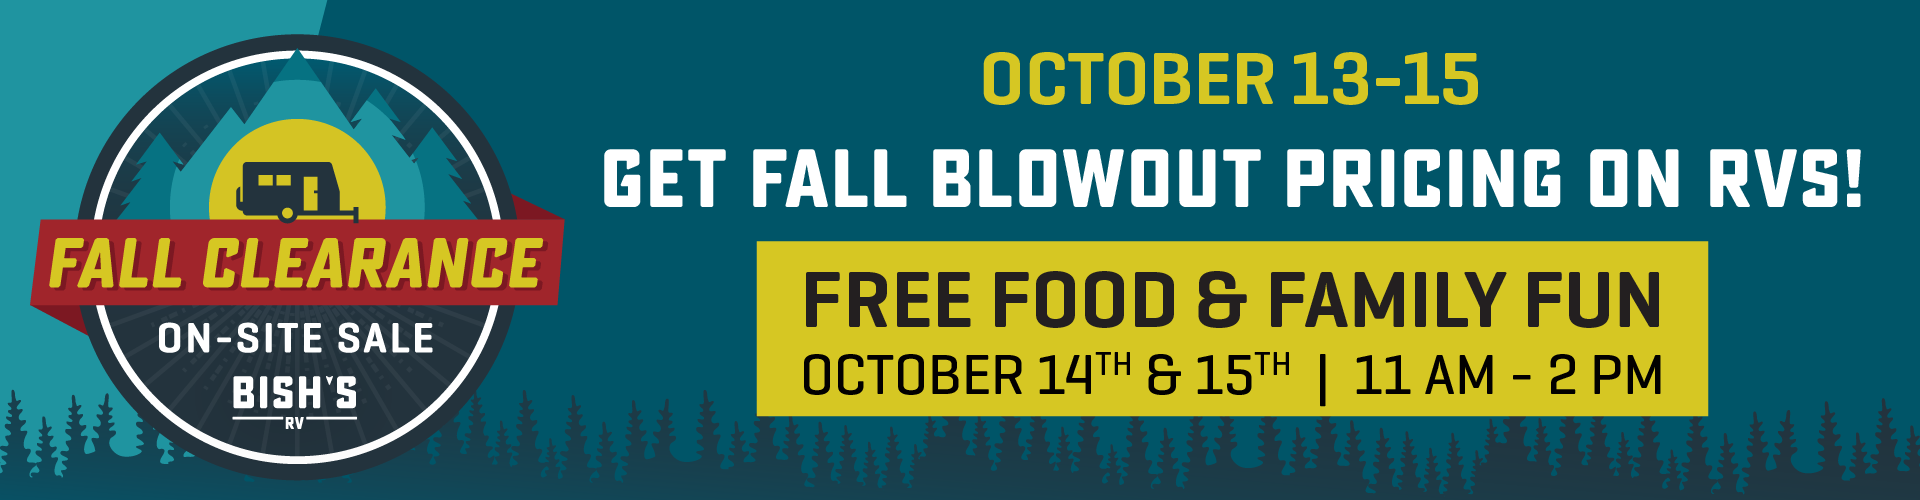 Fall Clearance On-Site Sale - Free Food & Family Fun